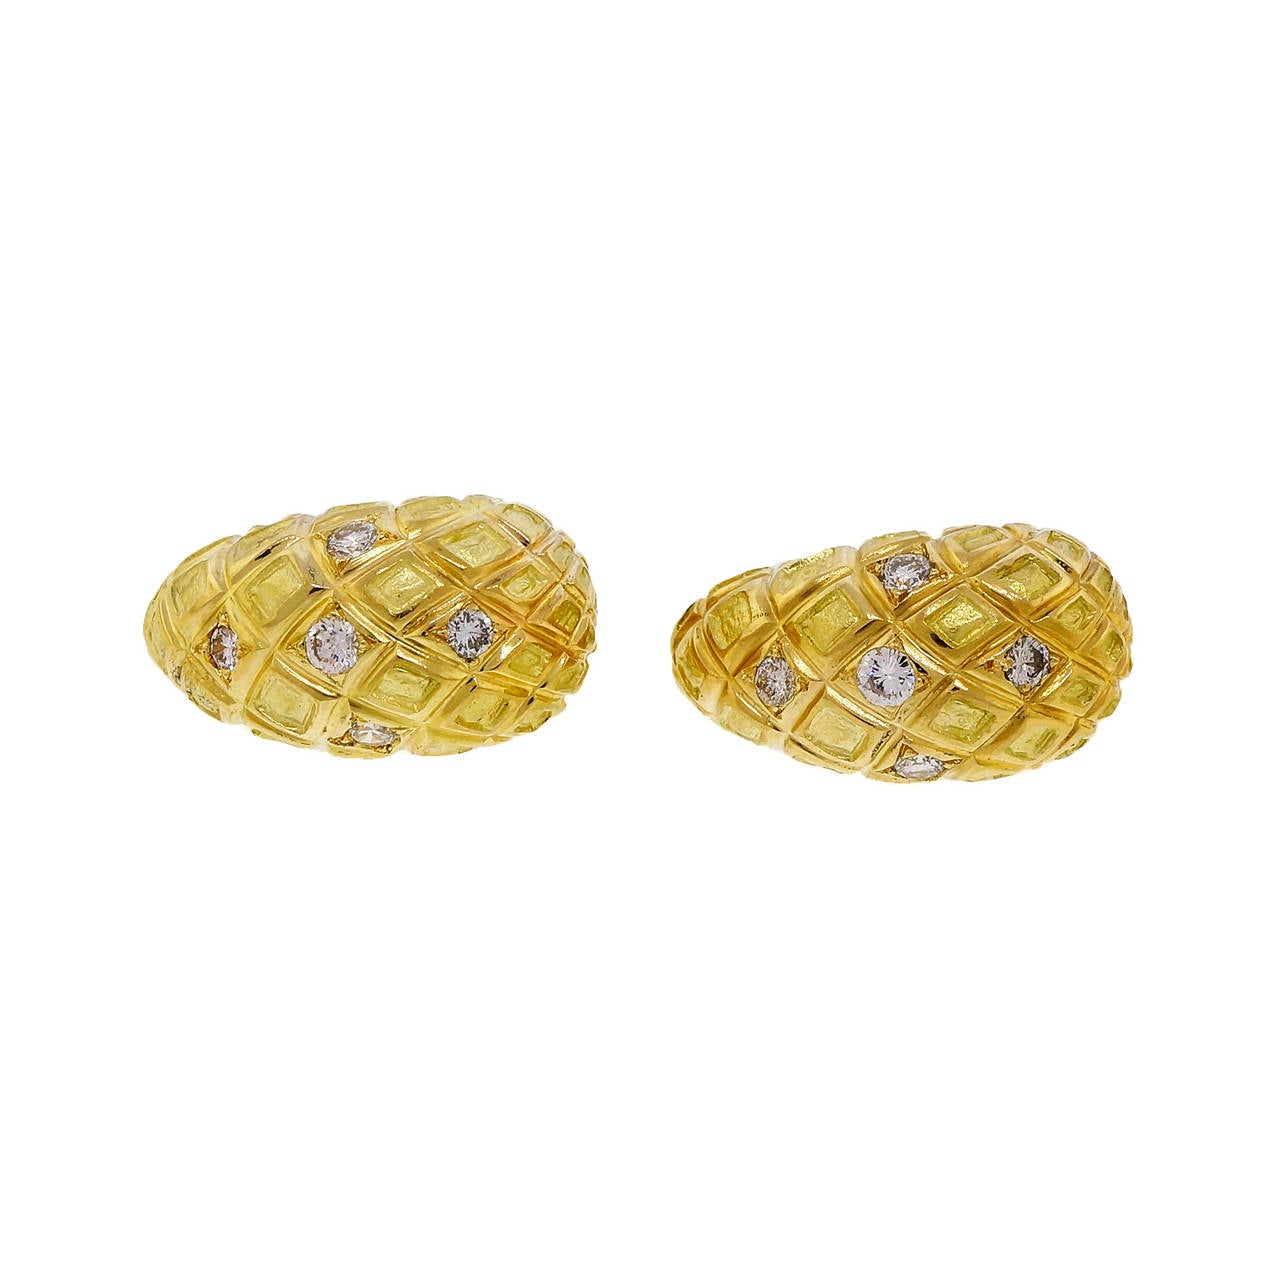 Vintage clip post diamond earrings. Textured and shiny finishes. Bright shiny diamonds. Circa 1980.

10 round diamonds, approx. total weight .70cts, H, SI1
18k yellow gold
Tested and stamped: 18k
21.4 grams
Top to bottom: 26.08mm or 1.03